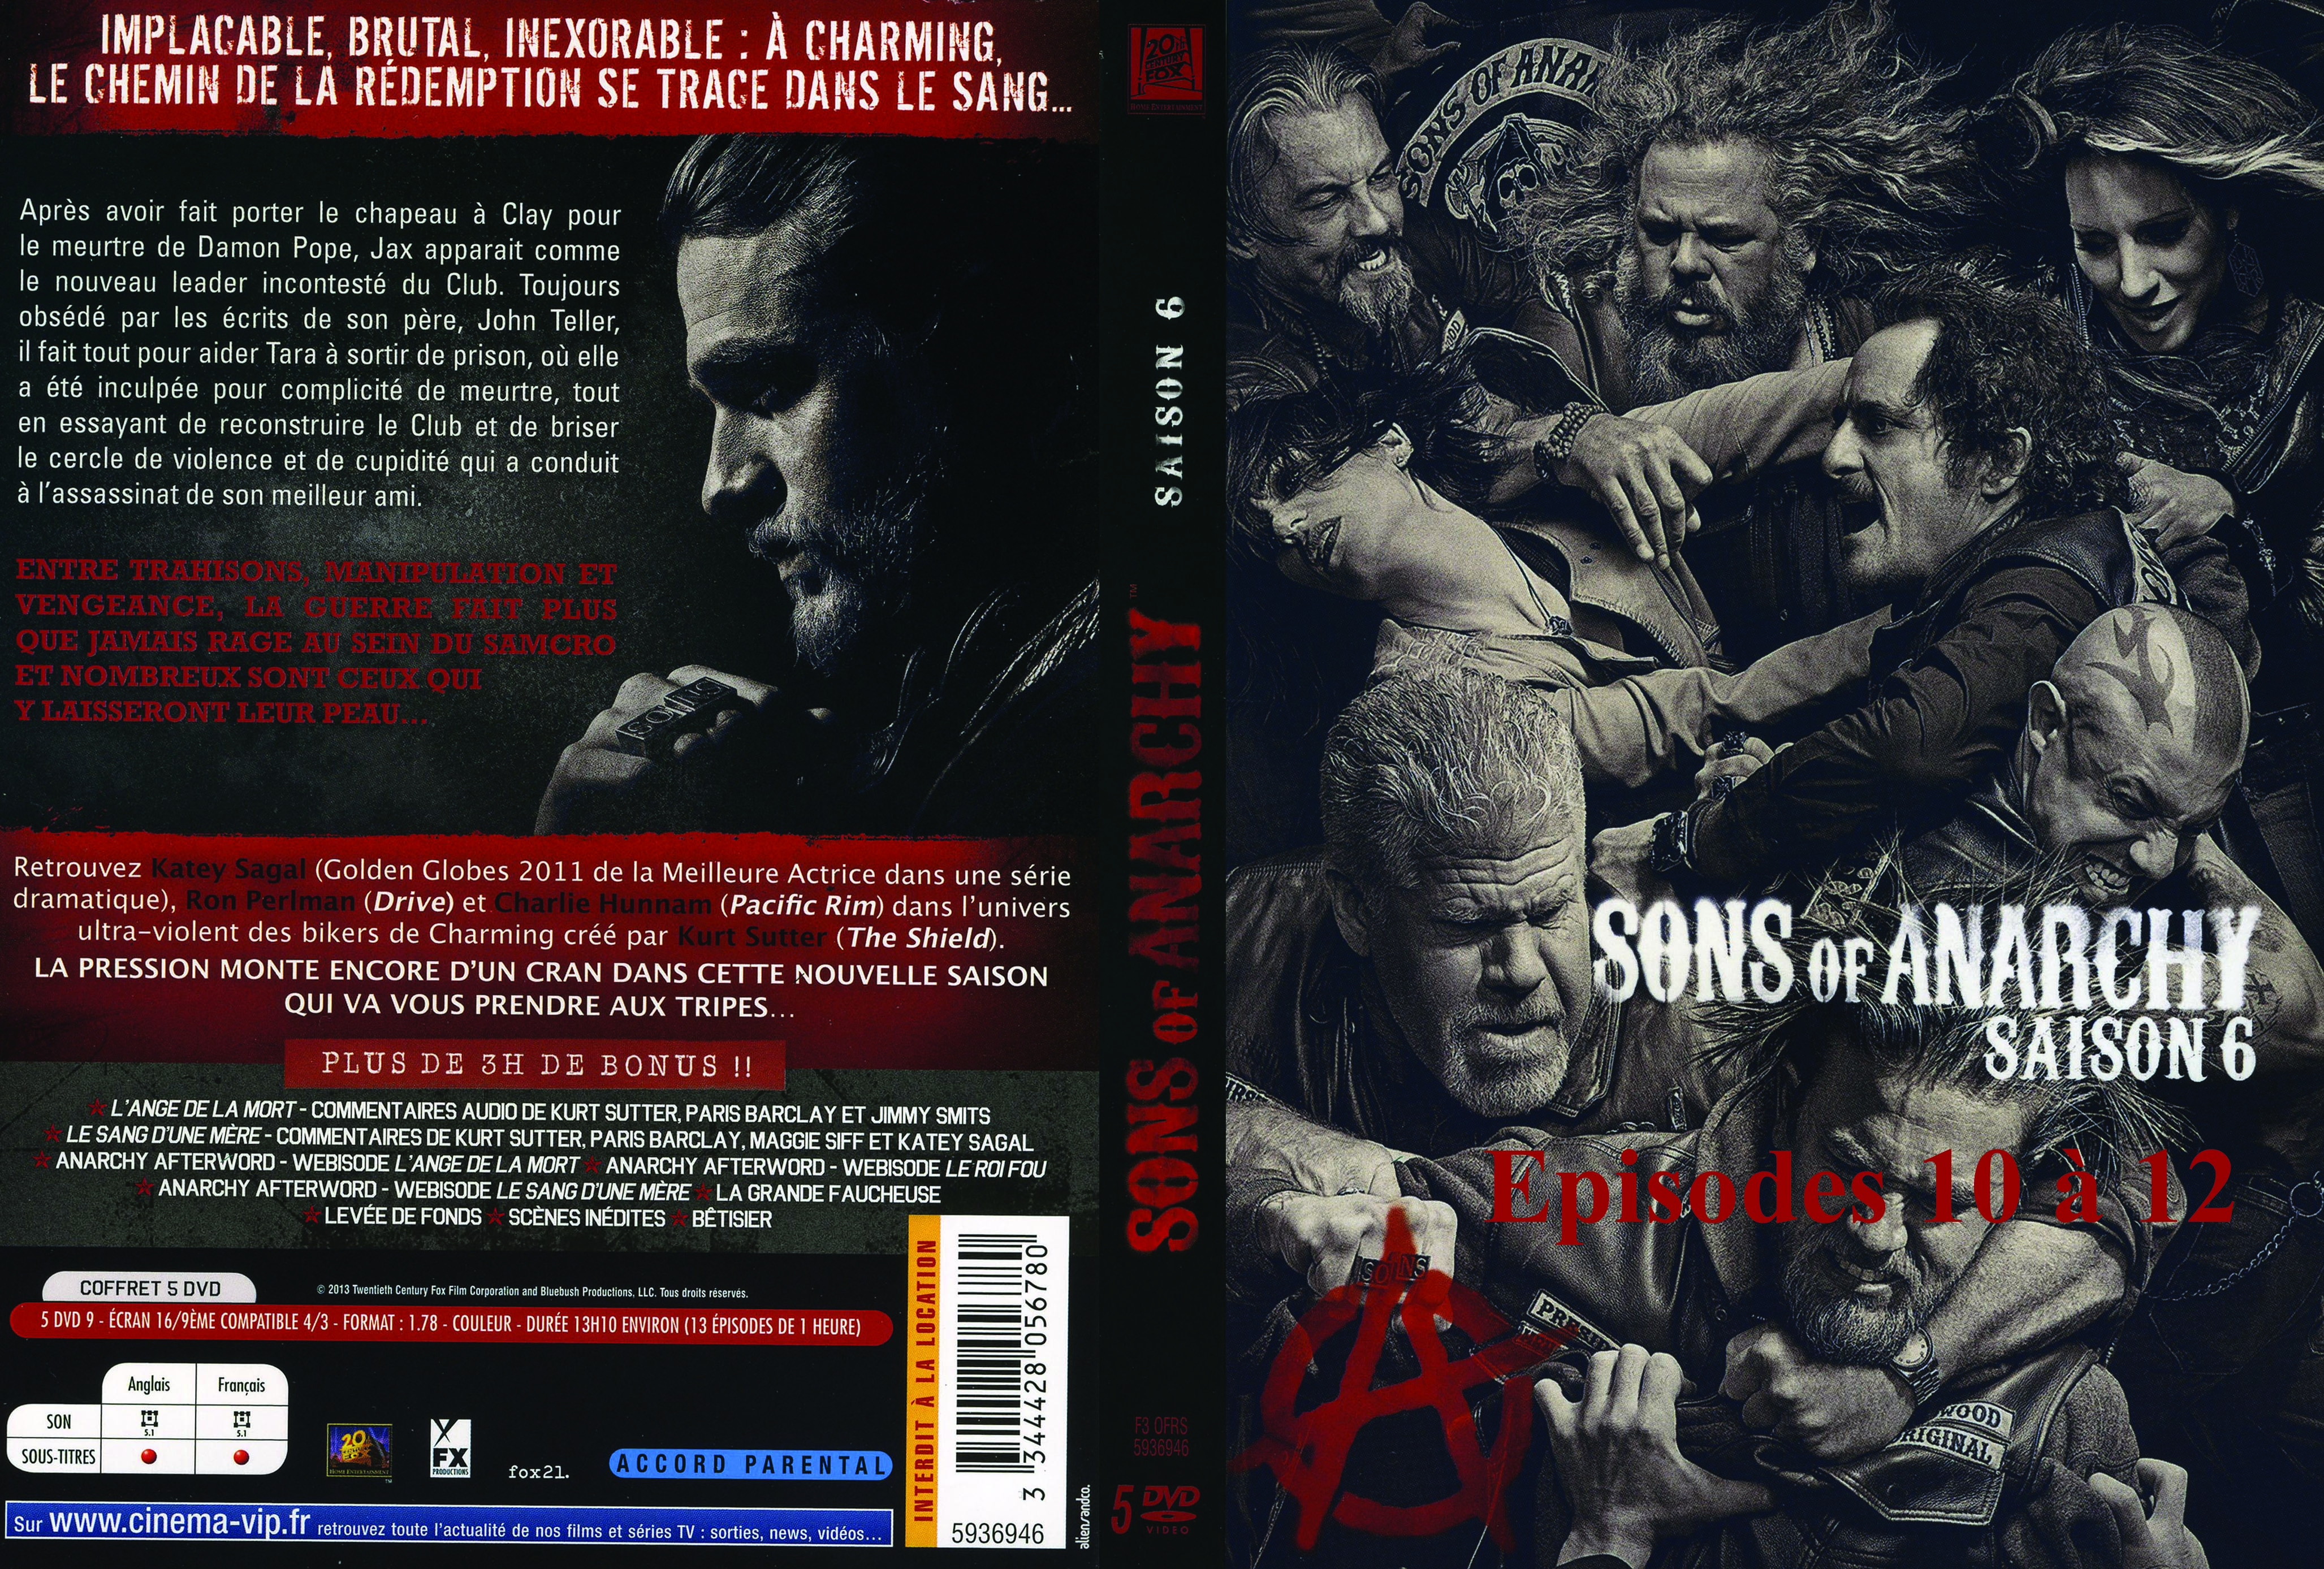 Jaquette DVD Sons of anarchy saison 6 DVD 4 custom